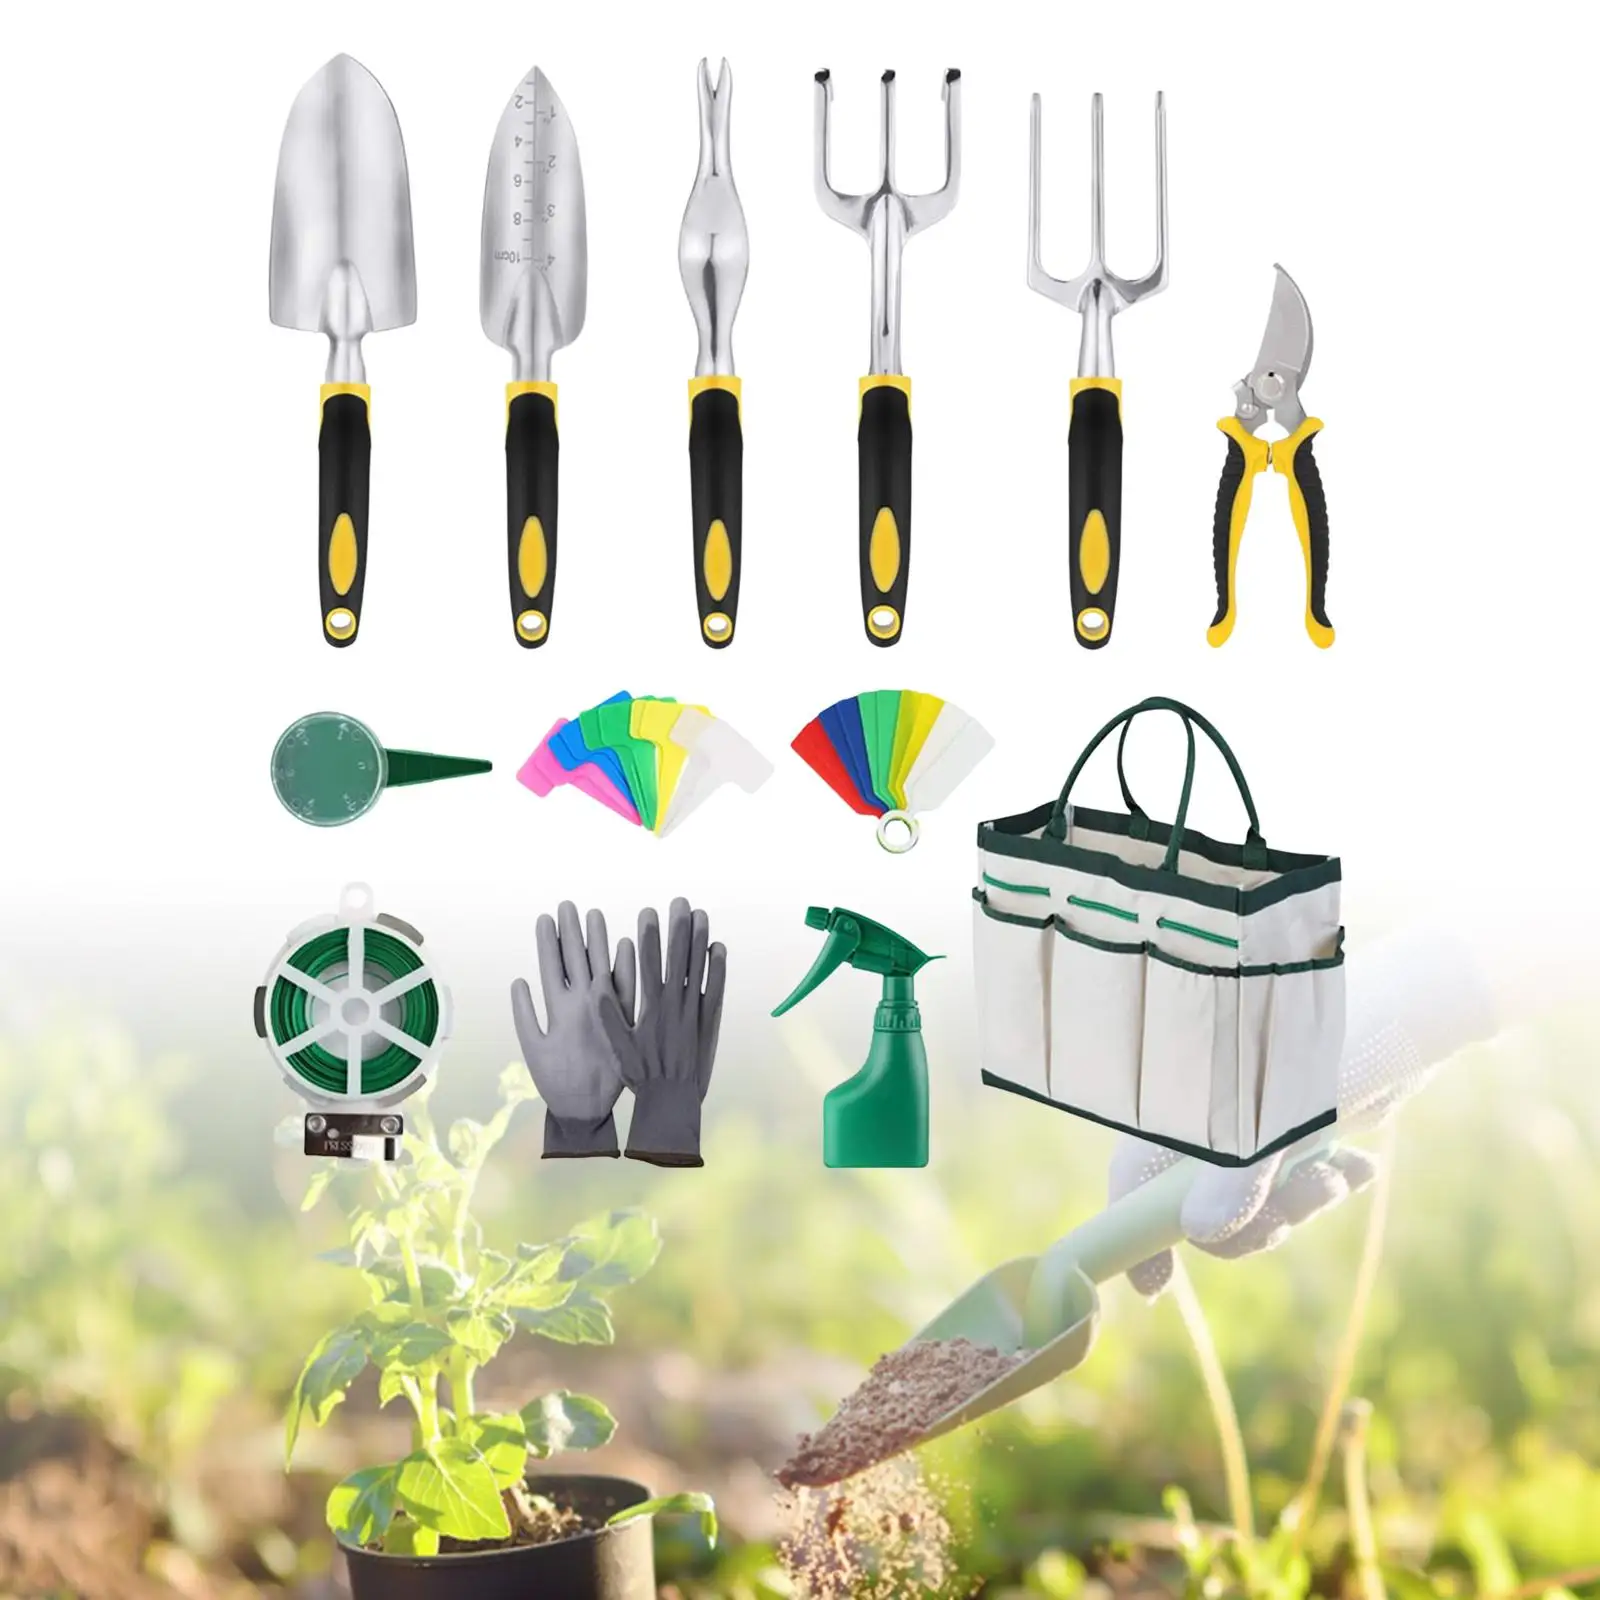 13x Handheld Hand Shovels Cultivation Hand Tool Weeding Tools Hoe Garden Tool Gardening Garden Shovels for Outside Lawn Digging